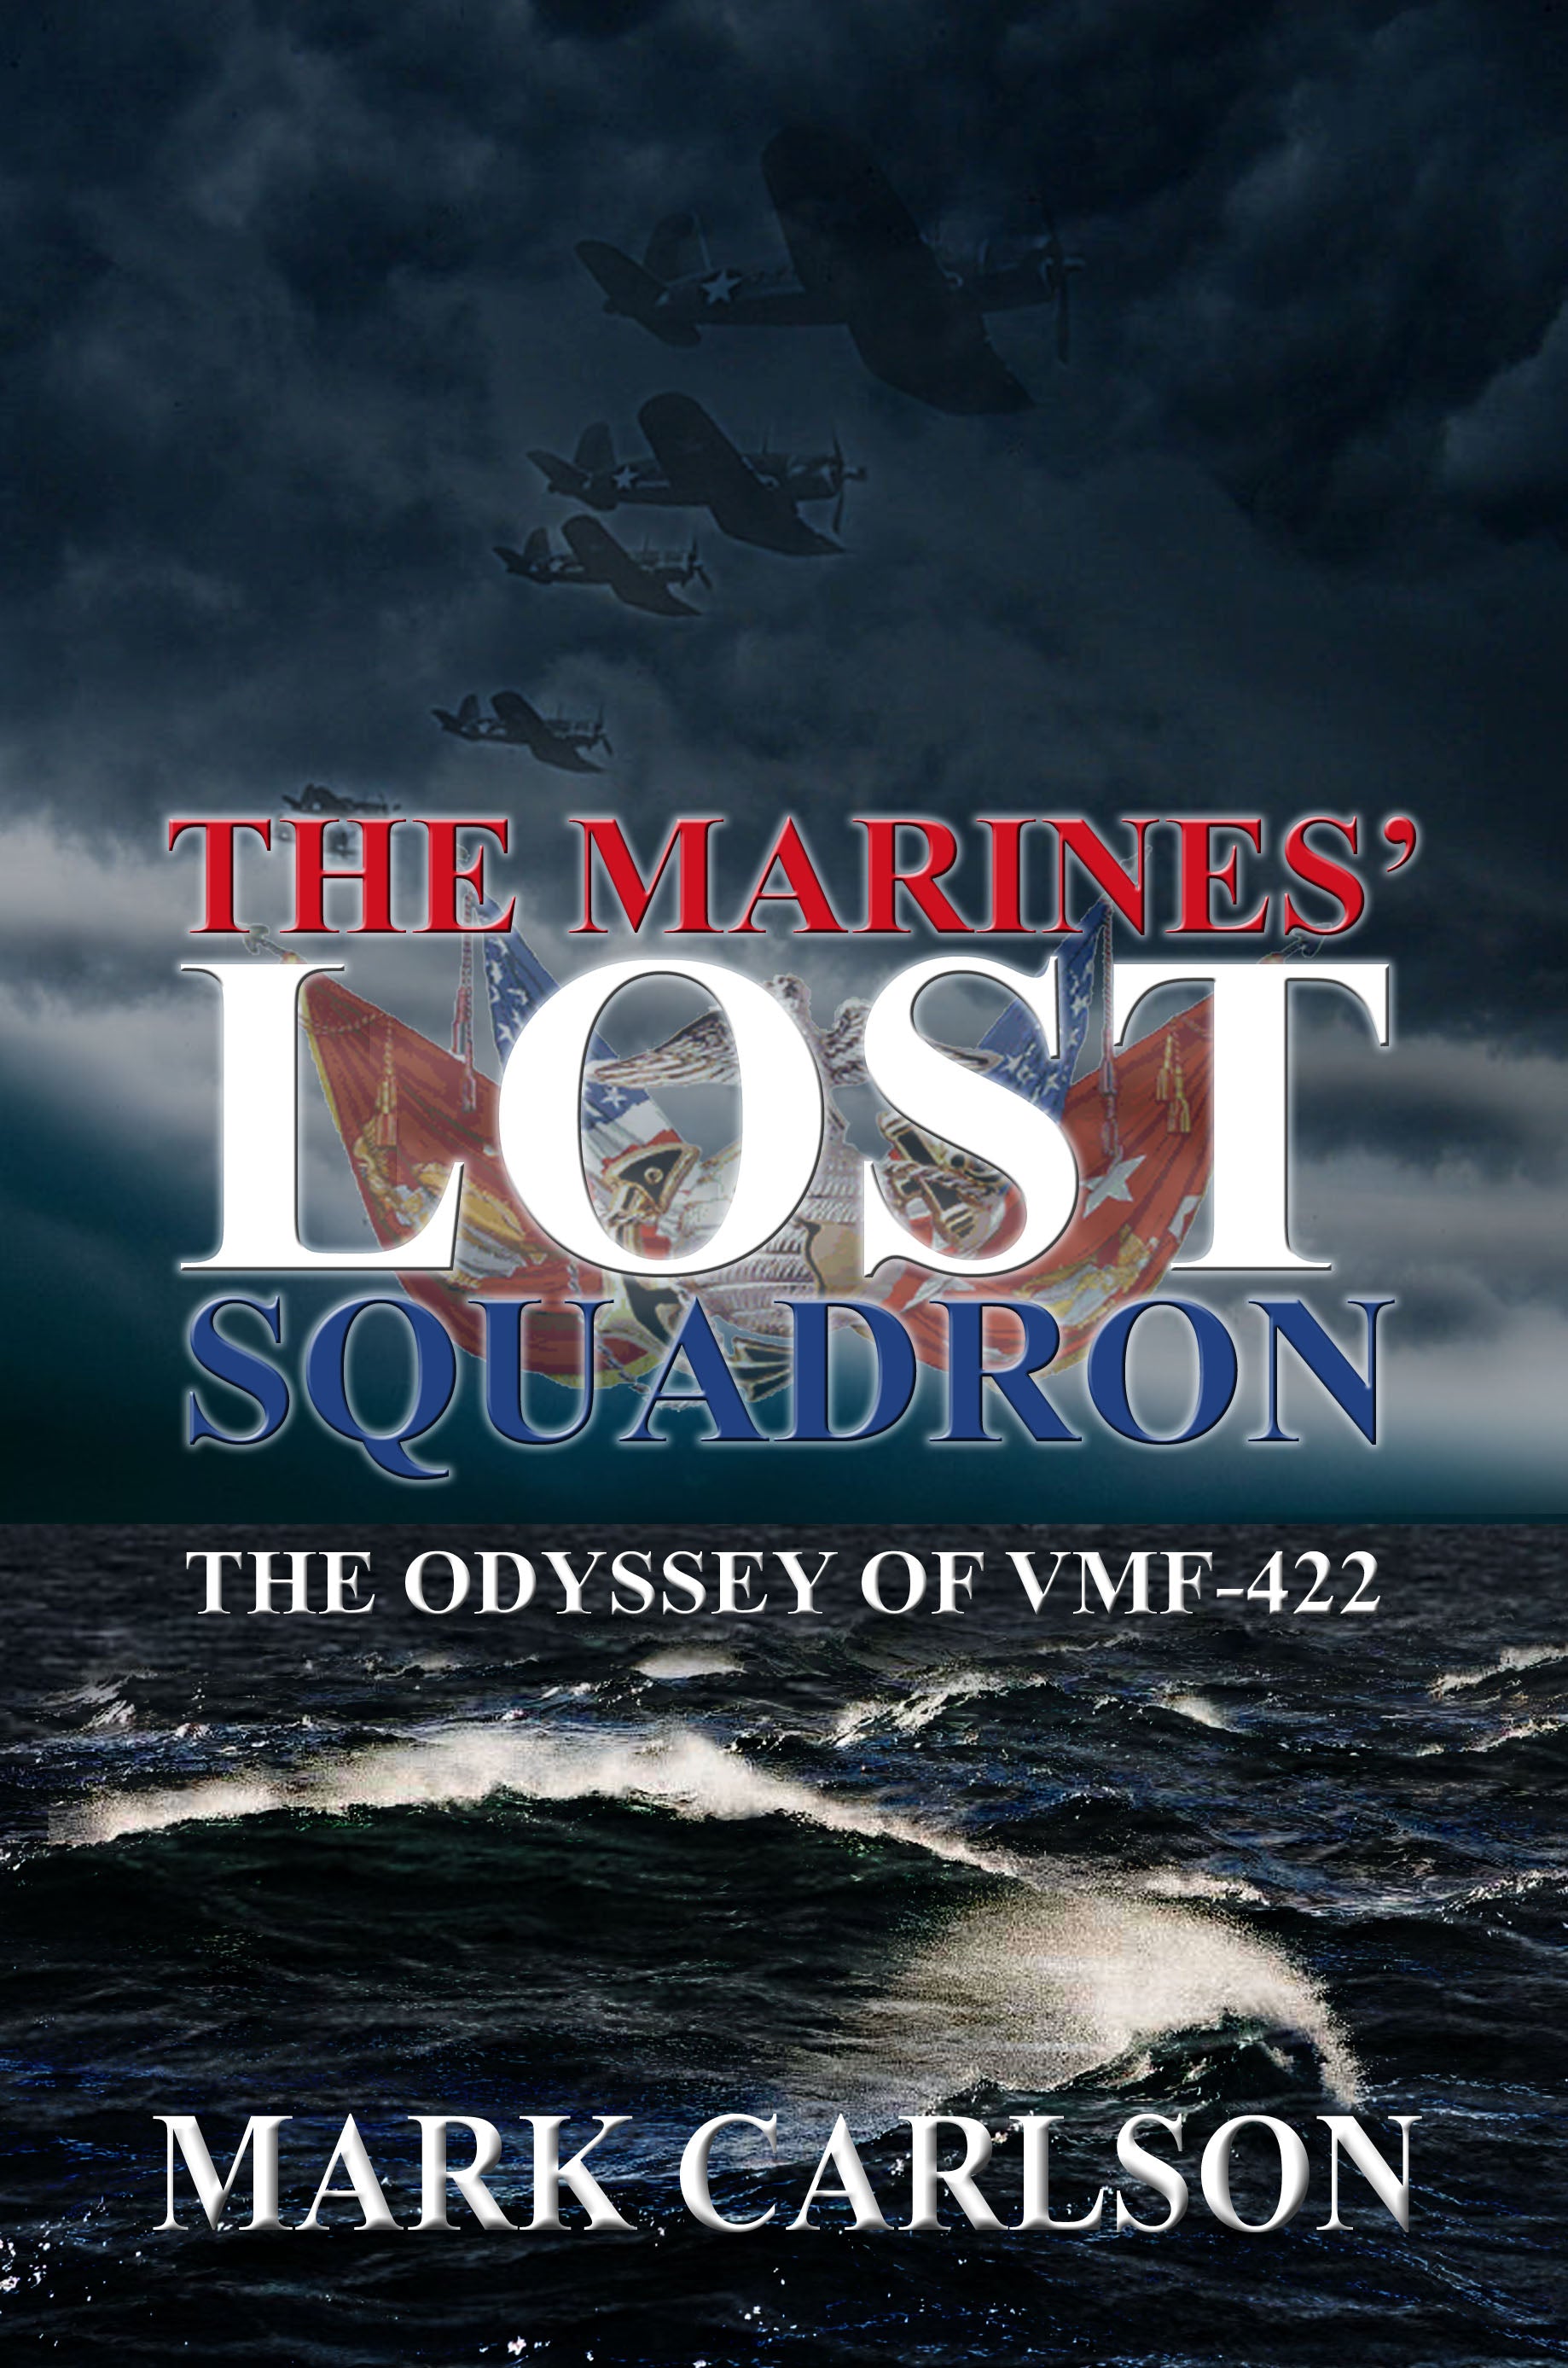 Mystery of lost Marine air squadron in WW2 investigated by Mark Carlson in new book "The Marines' Lost Squadron"